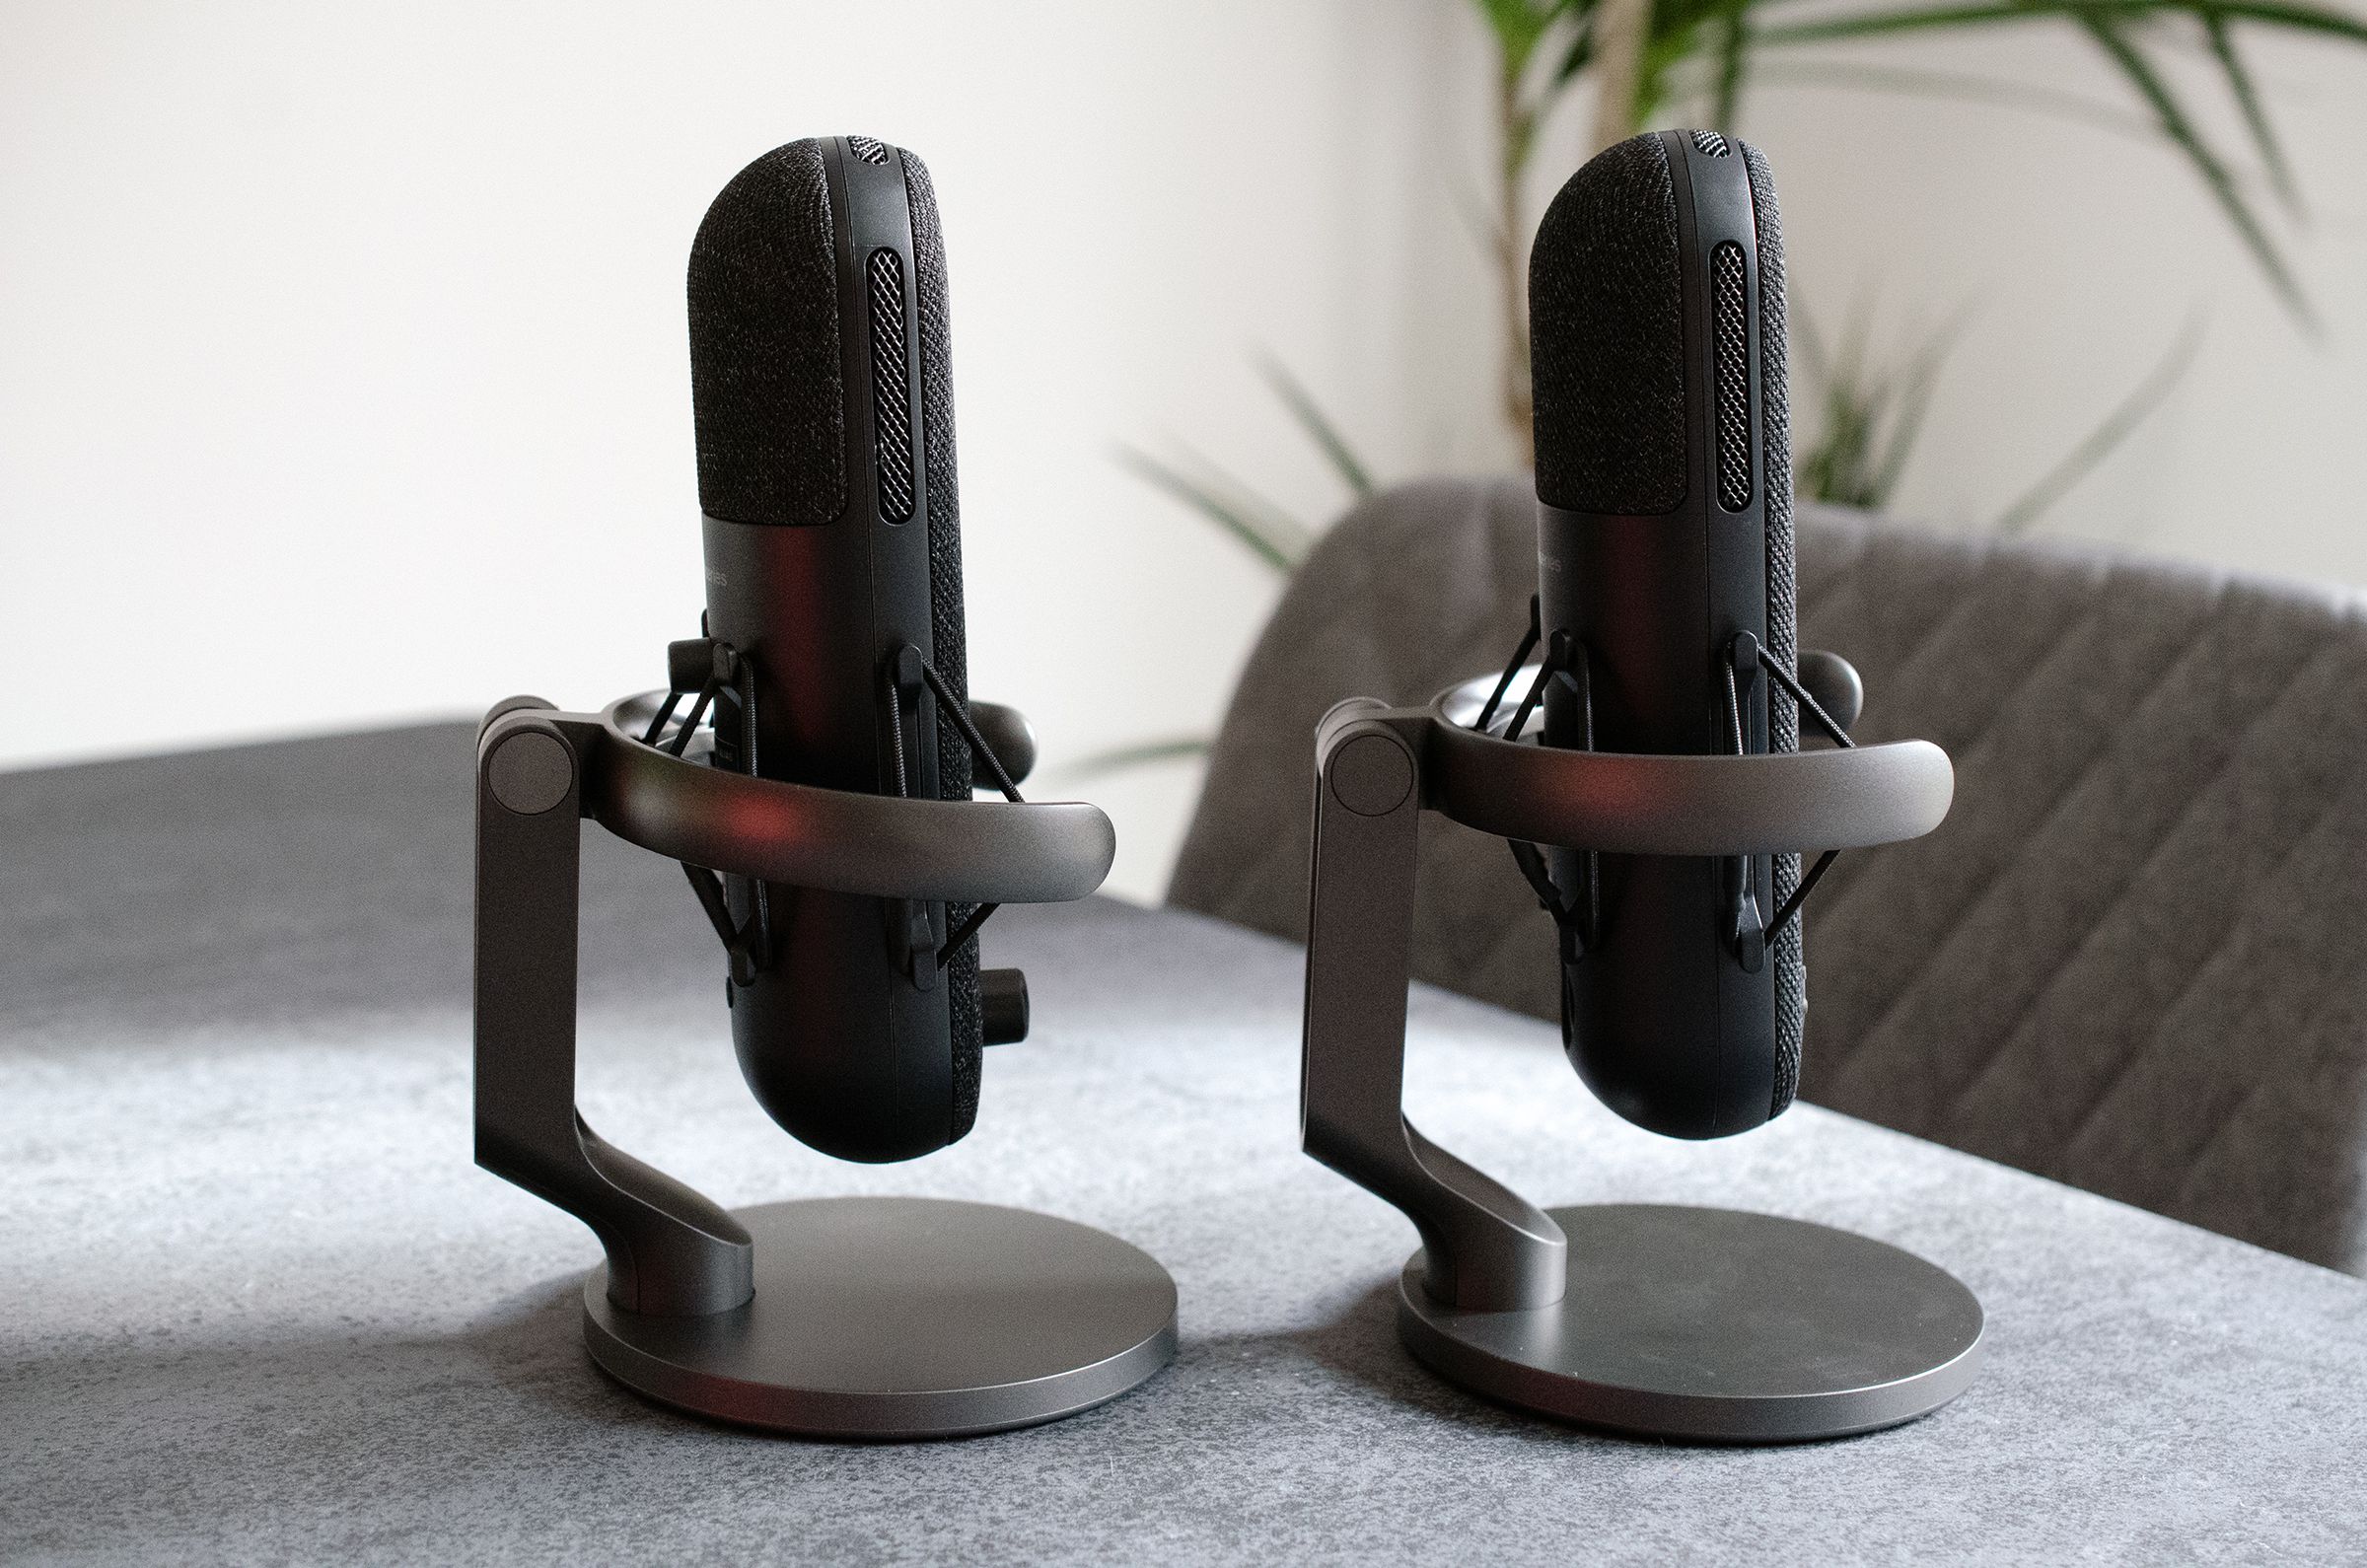 Both Alias microphones come with a sturdy stand.